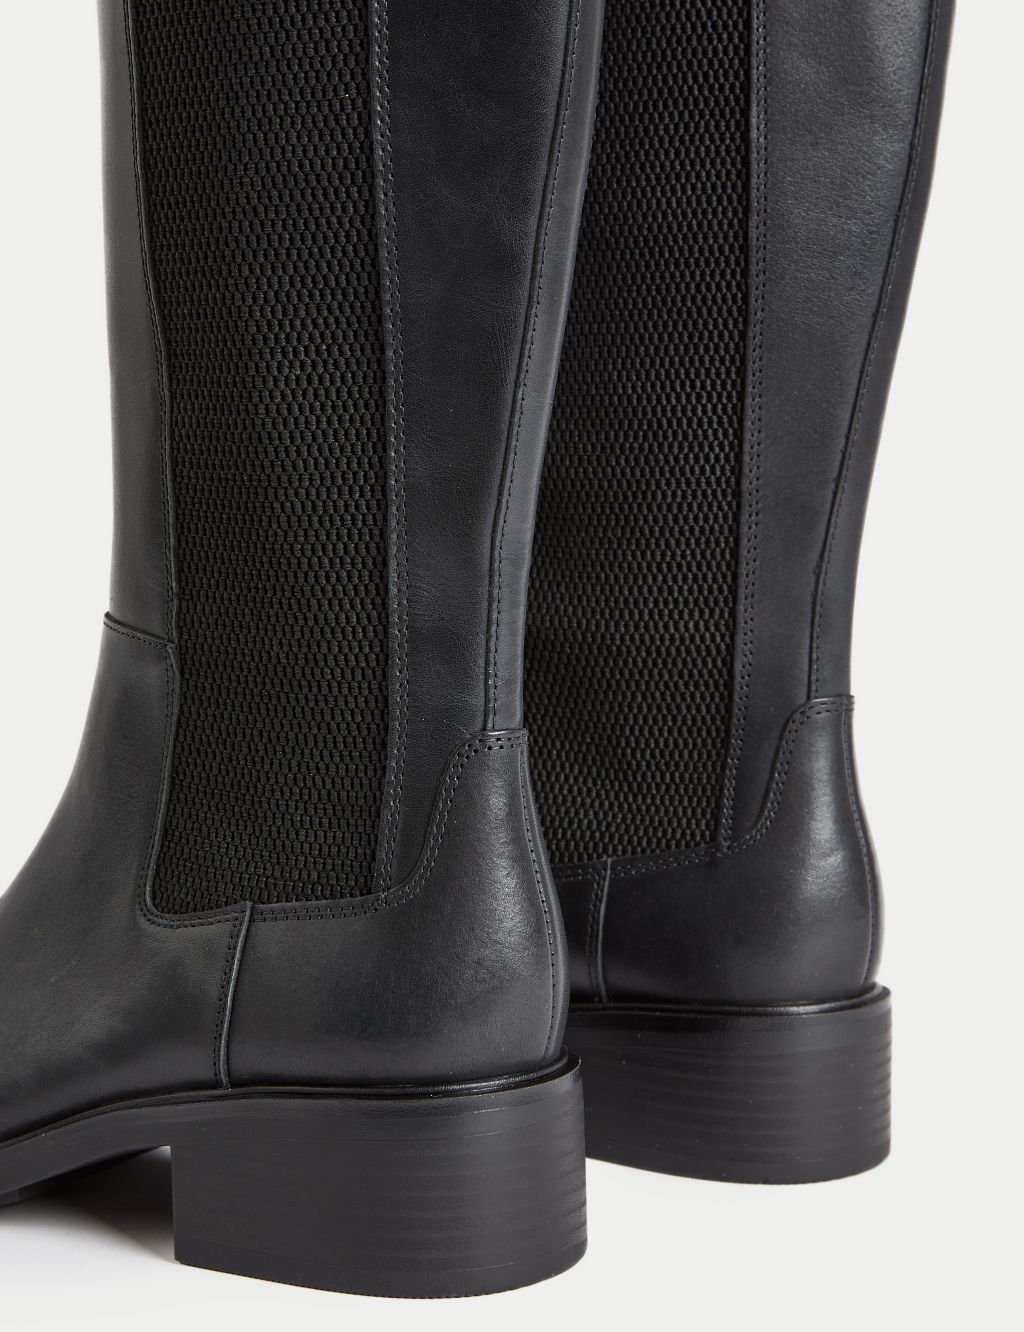 Leather Chelsea Flat Knee High Boots image 3